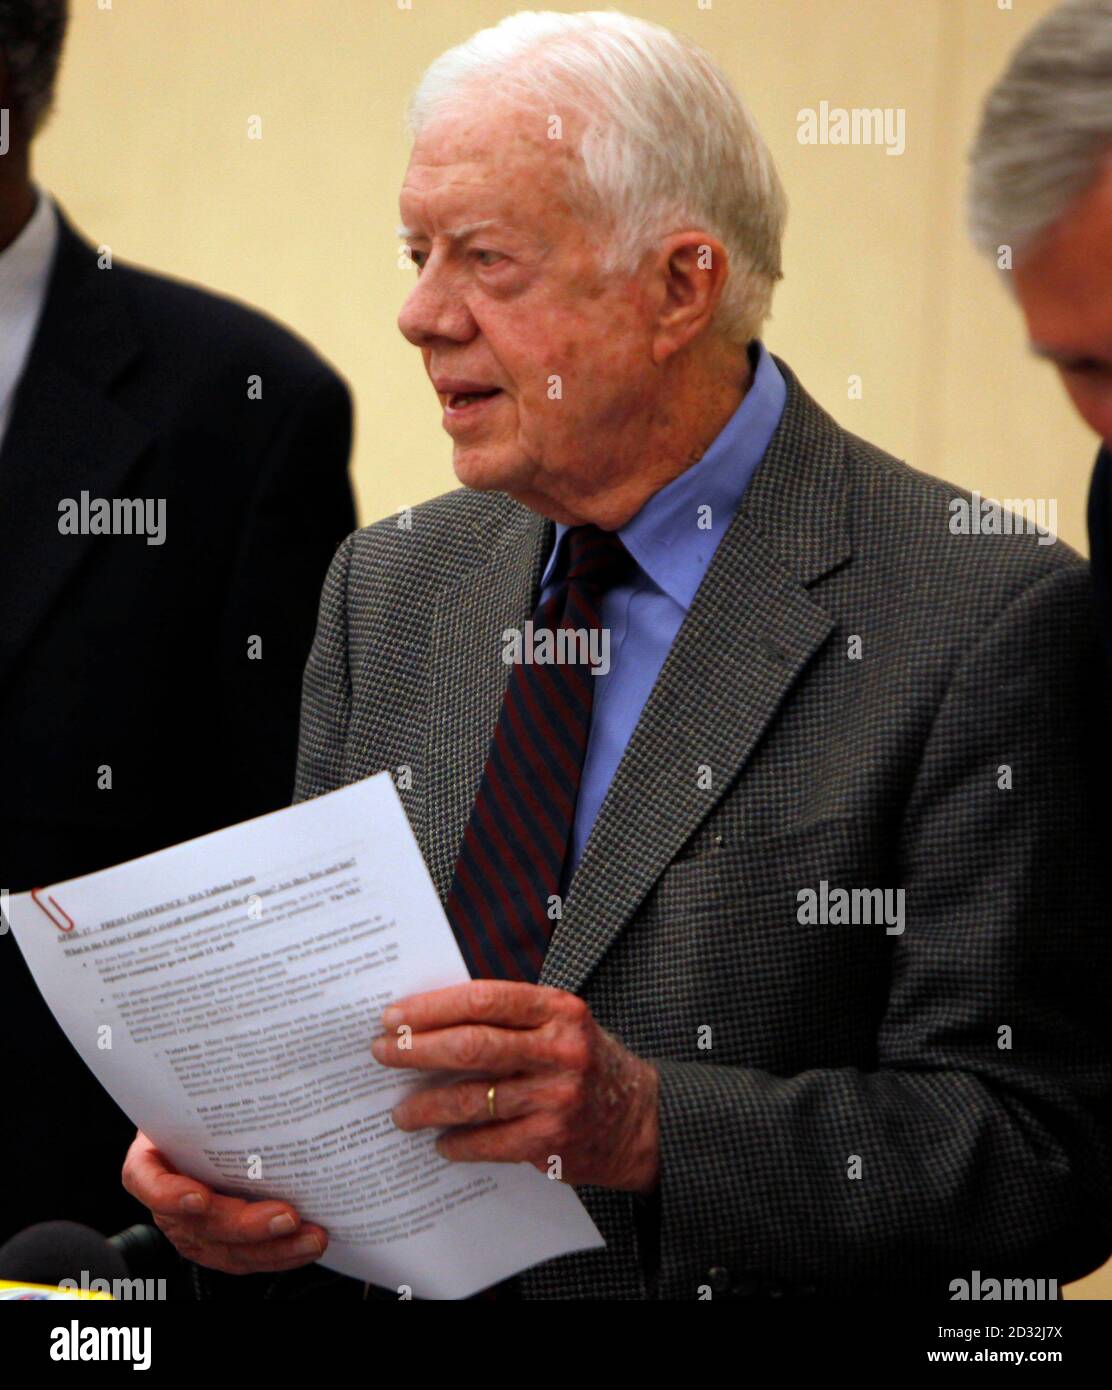 Former U.S. President Jimmy Carter looks at journalists during a news conference in Khartoum April 17, 2010. Sudan's first multi-party elections in 24 years fell short of international standards, two international observation missions said on Saturday in the first authoritative judgments on the poll. REUTERS/Zohra Bensemra (SUDAN - Tags: POLITICS ELECTIONS PROFILE) Stock Photo